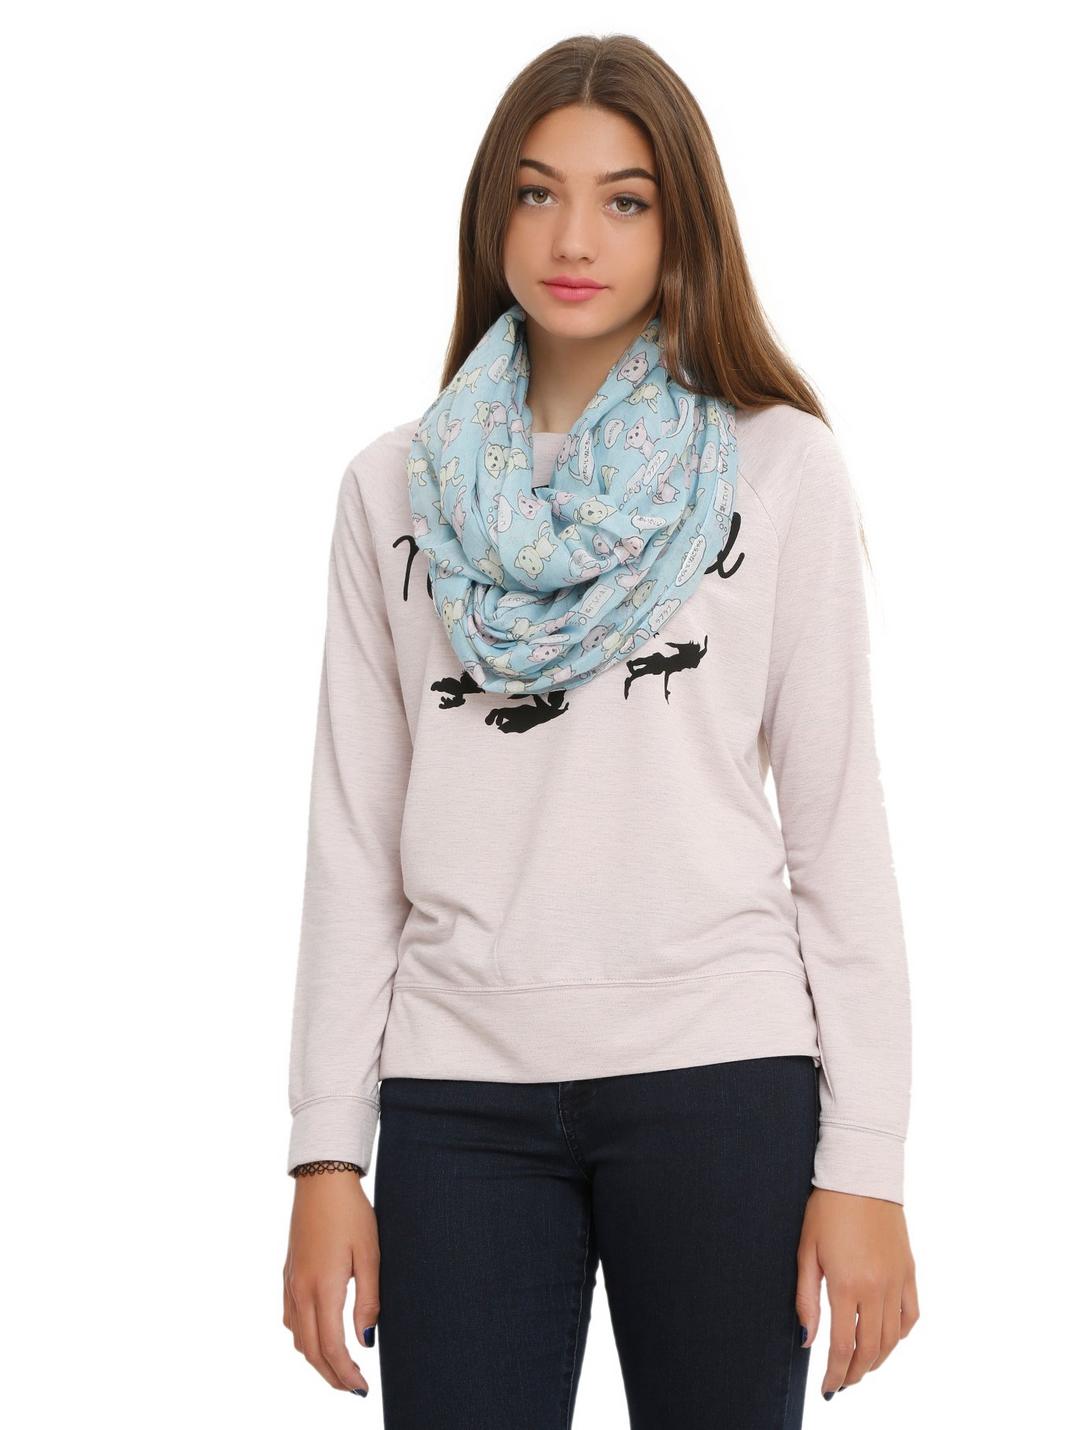 Emotional Cats Infinity Scarf, , hi-res